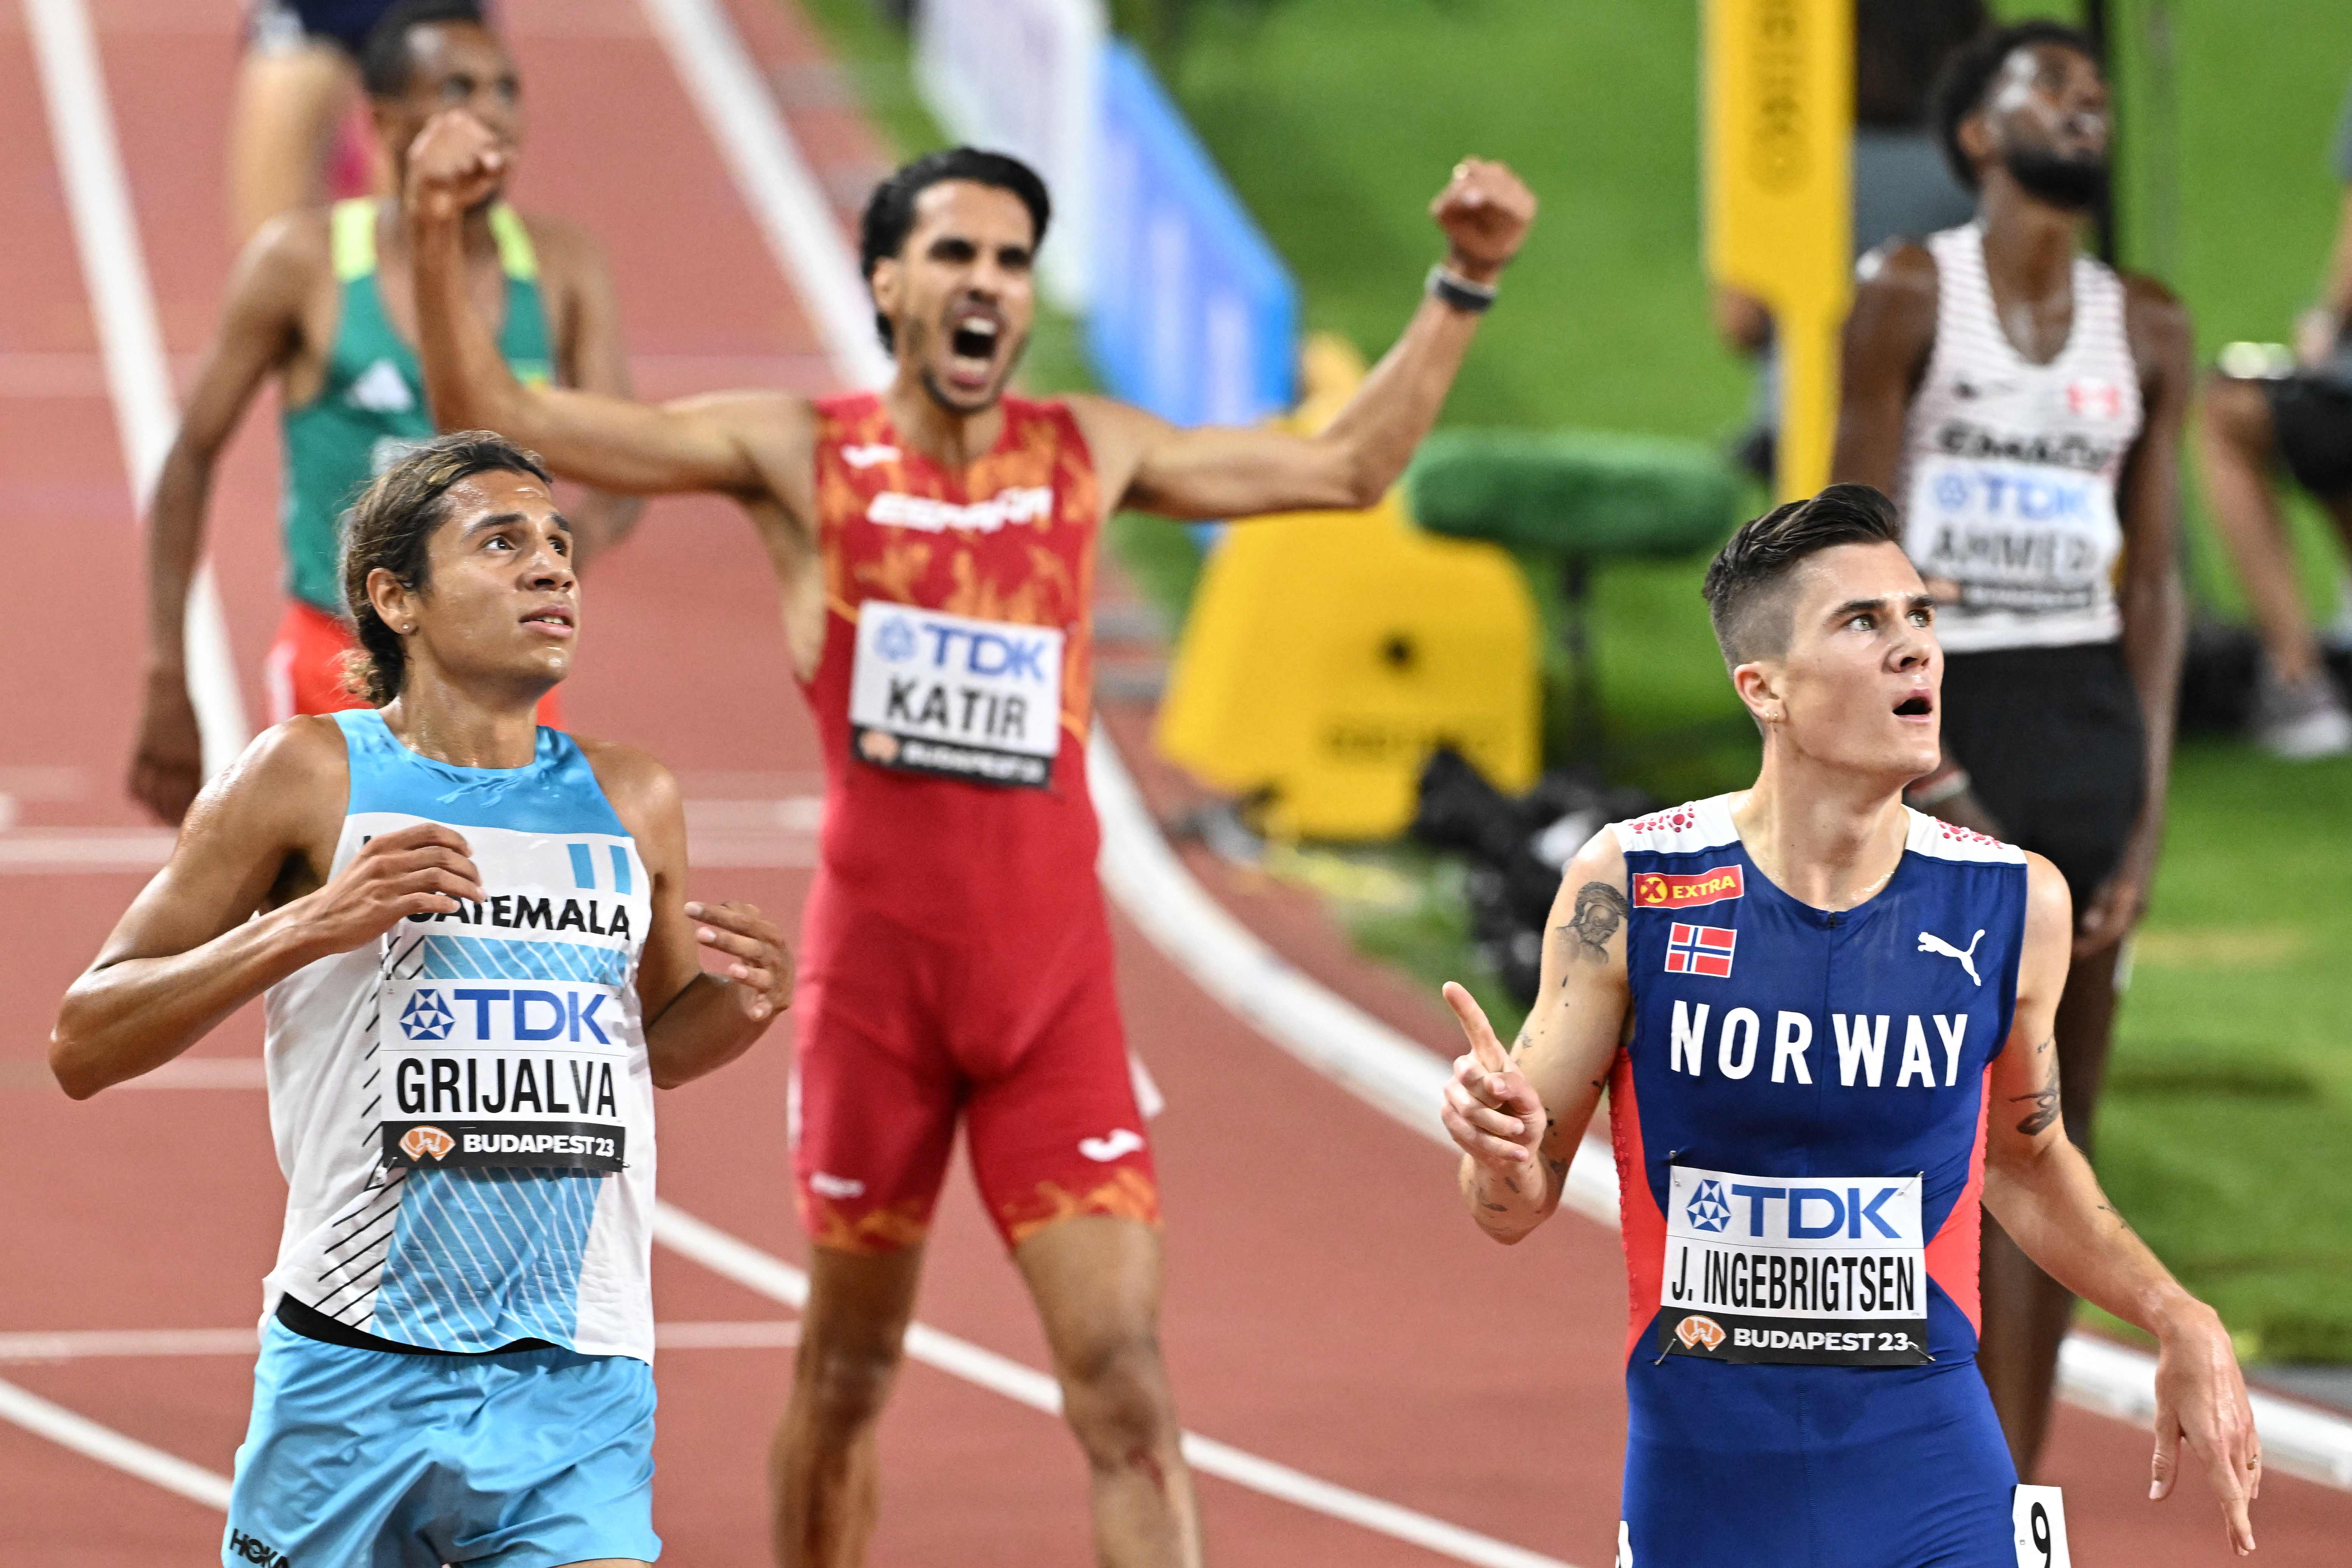 Norway's Jakob Ingebrigtsen, Spain's Mohamed Katir, and Guatemala's Luis Grijalva react after the men's 5000m final during the World Athletics Championships at the National Athletics Centre in Budapest on August 27, 2023. (Photo by Attila KISBENEDEK / AFP)